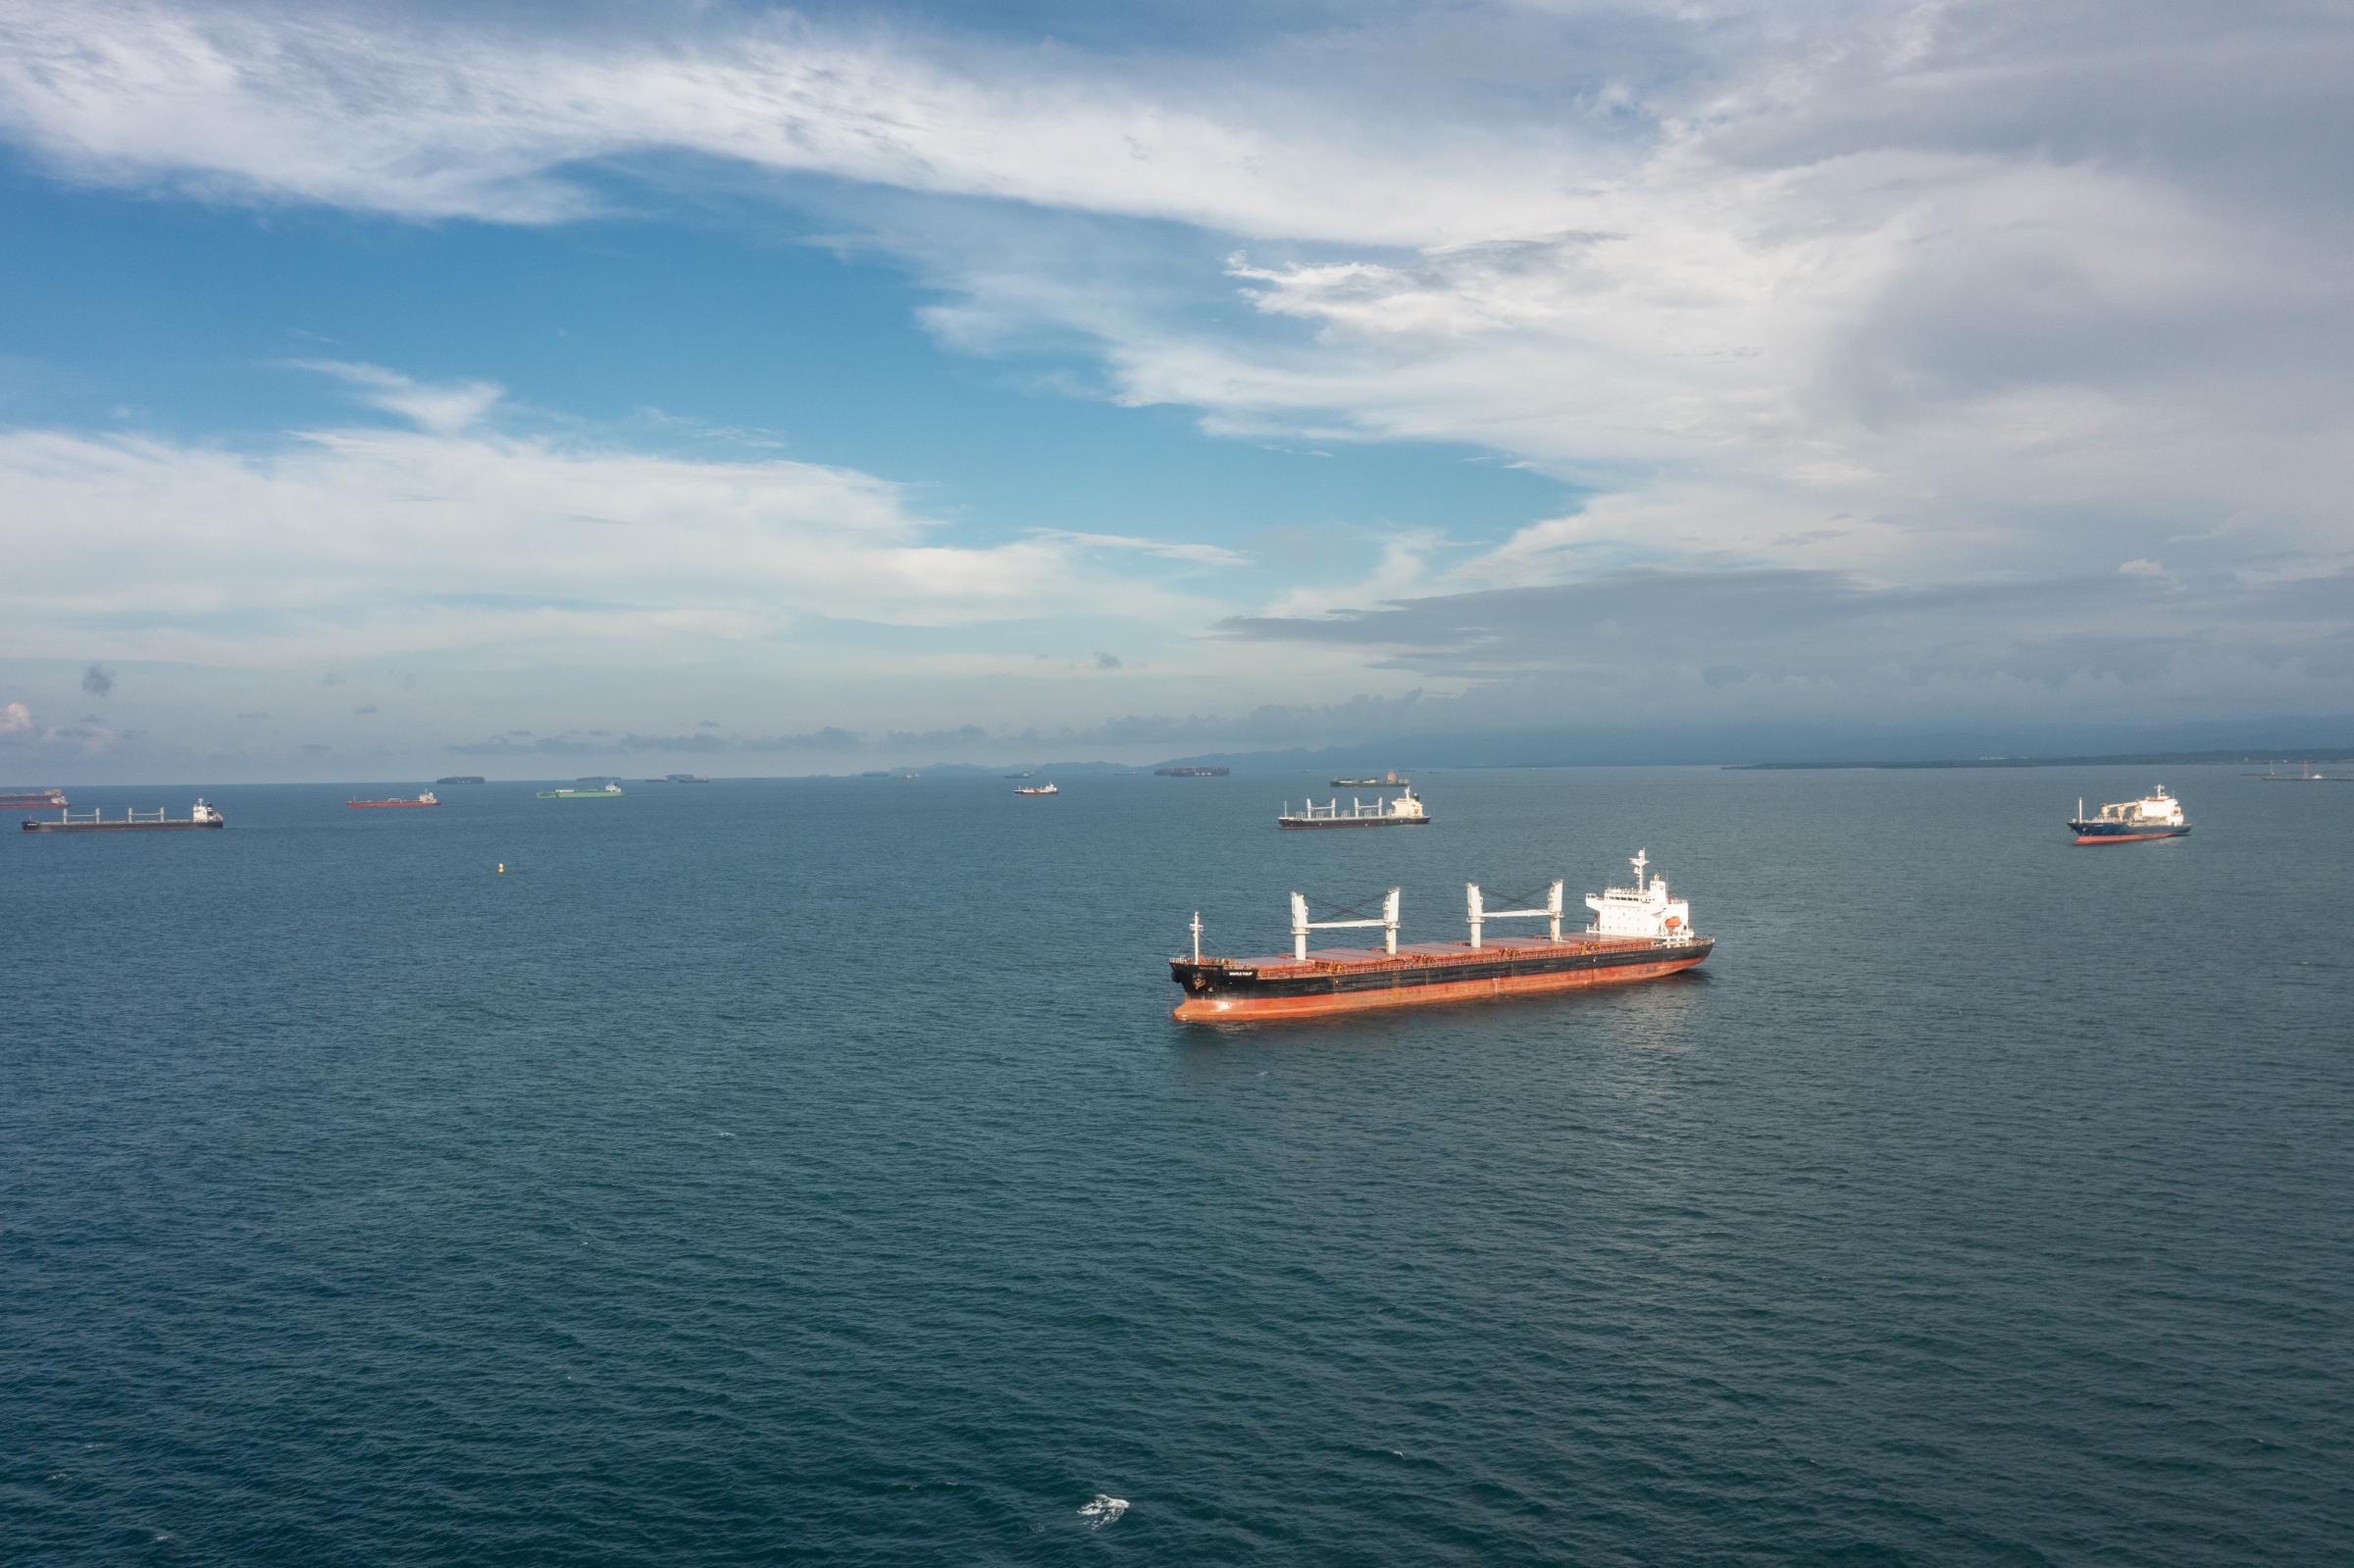 Bloomberg: Saving the Panama Canal Will Take Years and Cost Billions, If It’s Even Possible - Anchored ships waitin to cross the Panama Canal from the Atlantic side on Monday, Nov. 20, view...